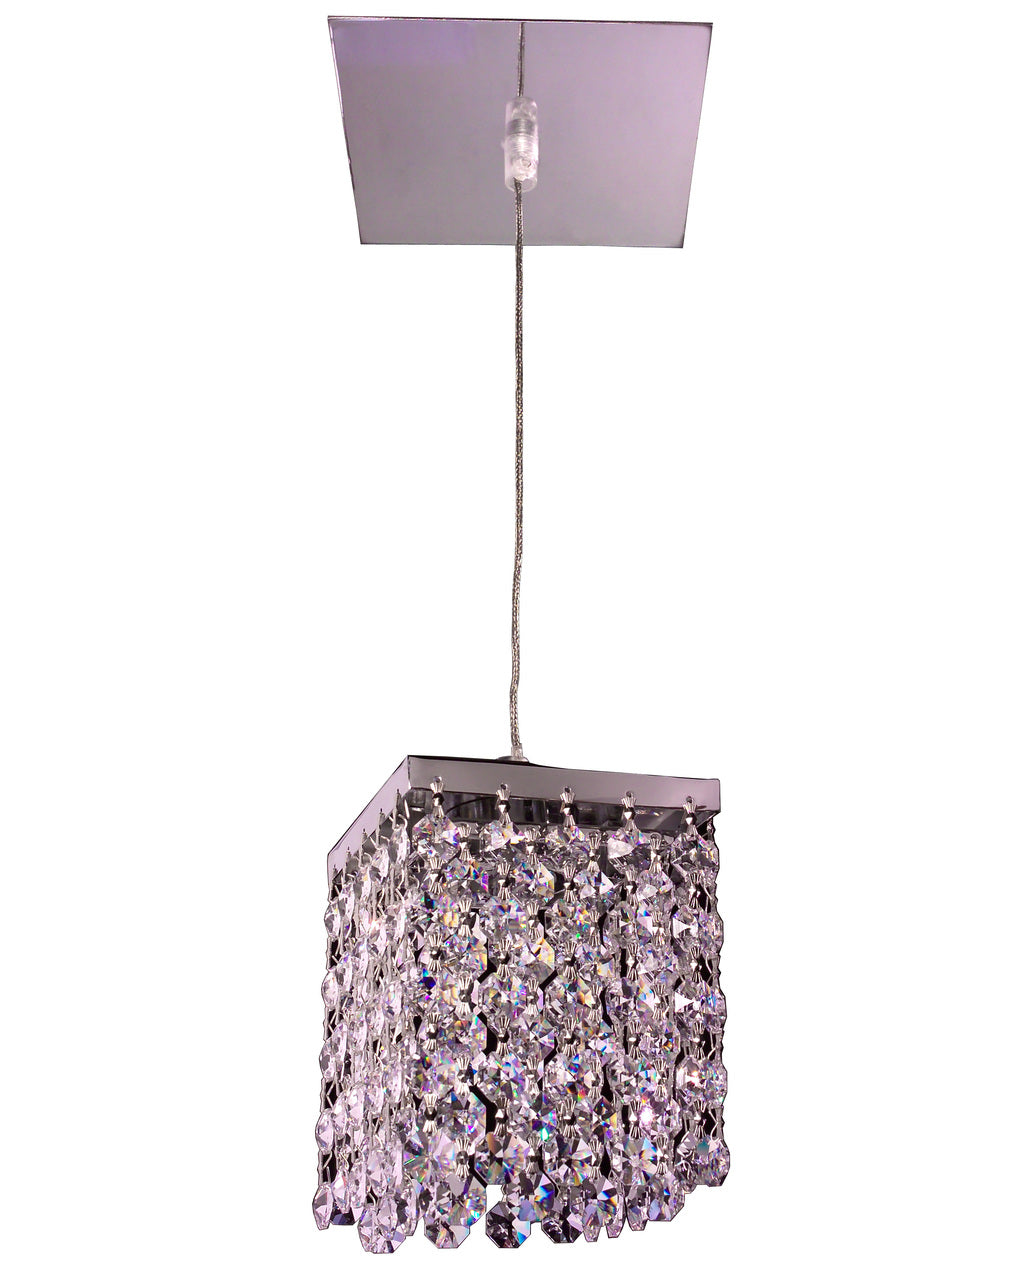 Classic Lighting 16101 S Bedazzle Crystal Pendant in Chrome